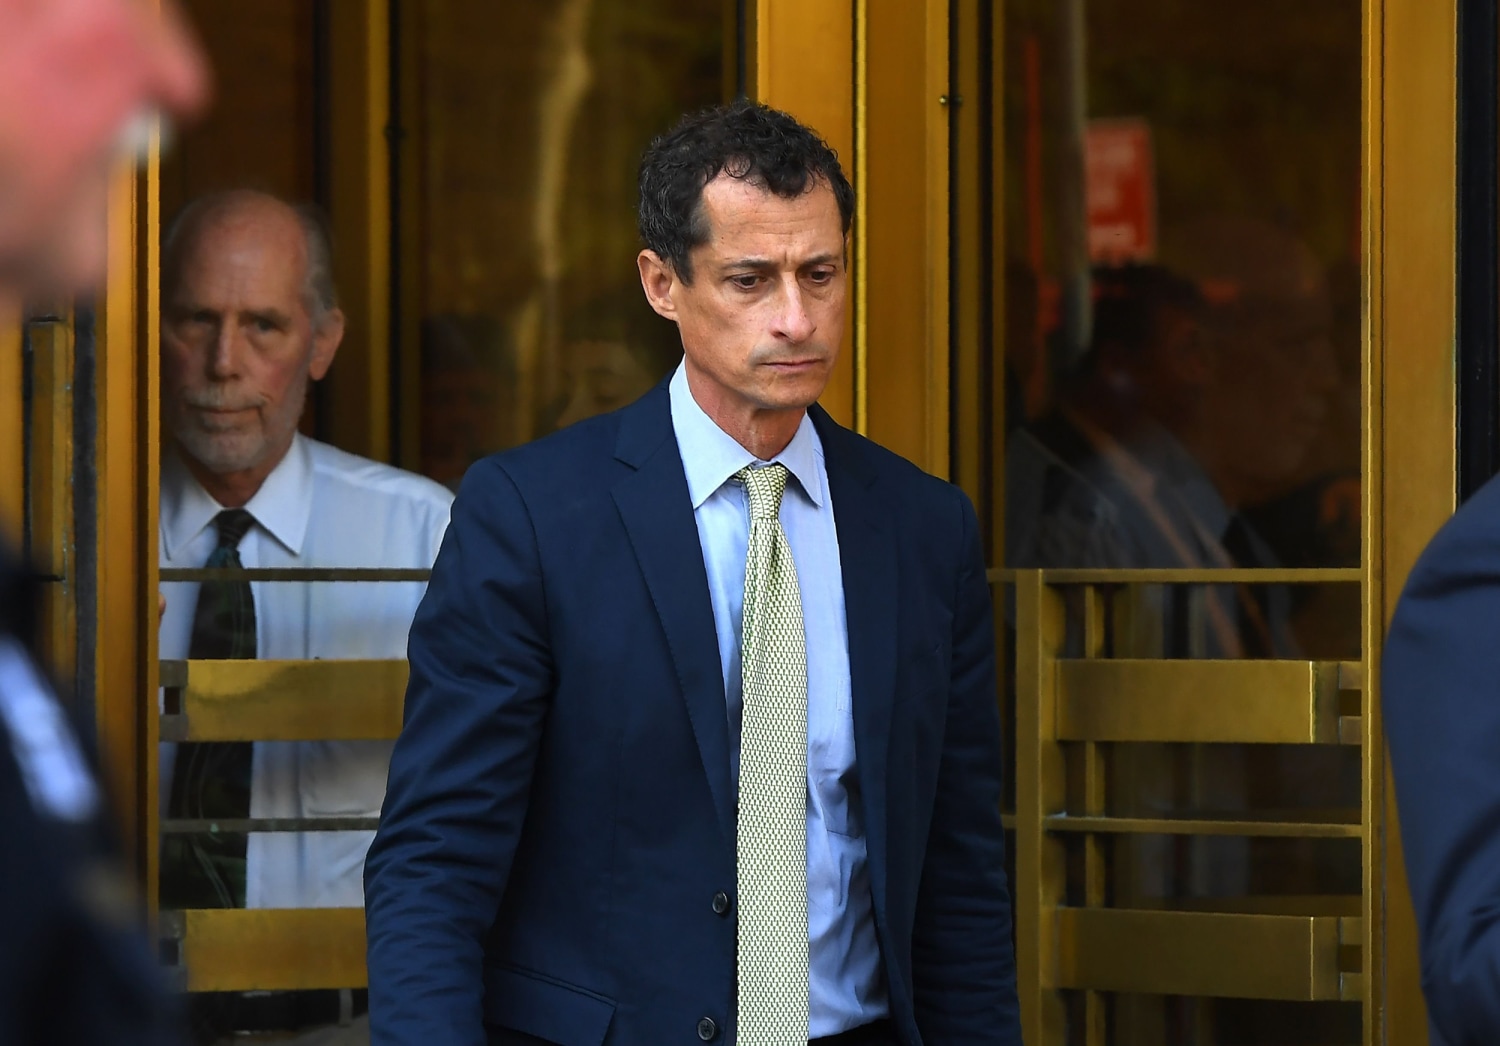 Anthony Weiner Sentenced to Nearly Two Years in Prison for Sexting Scandal image